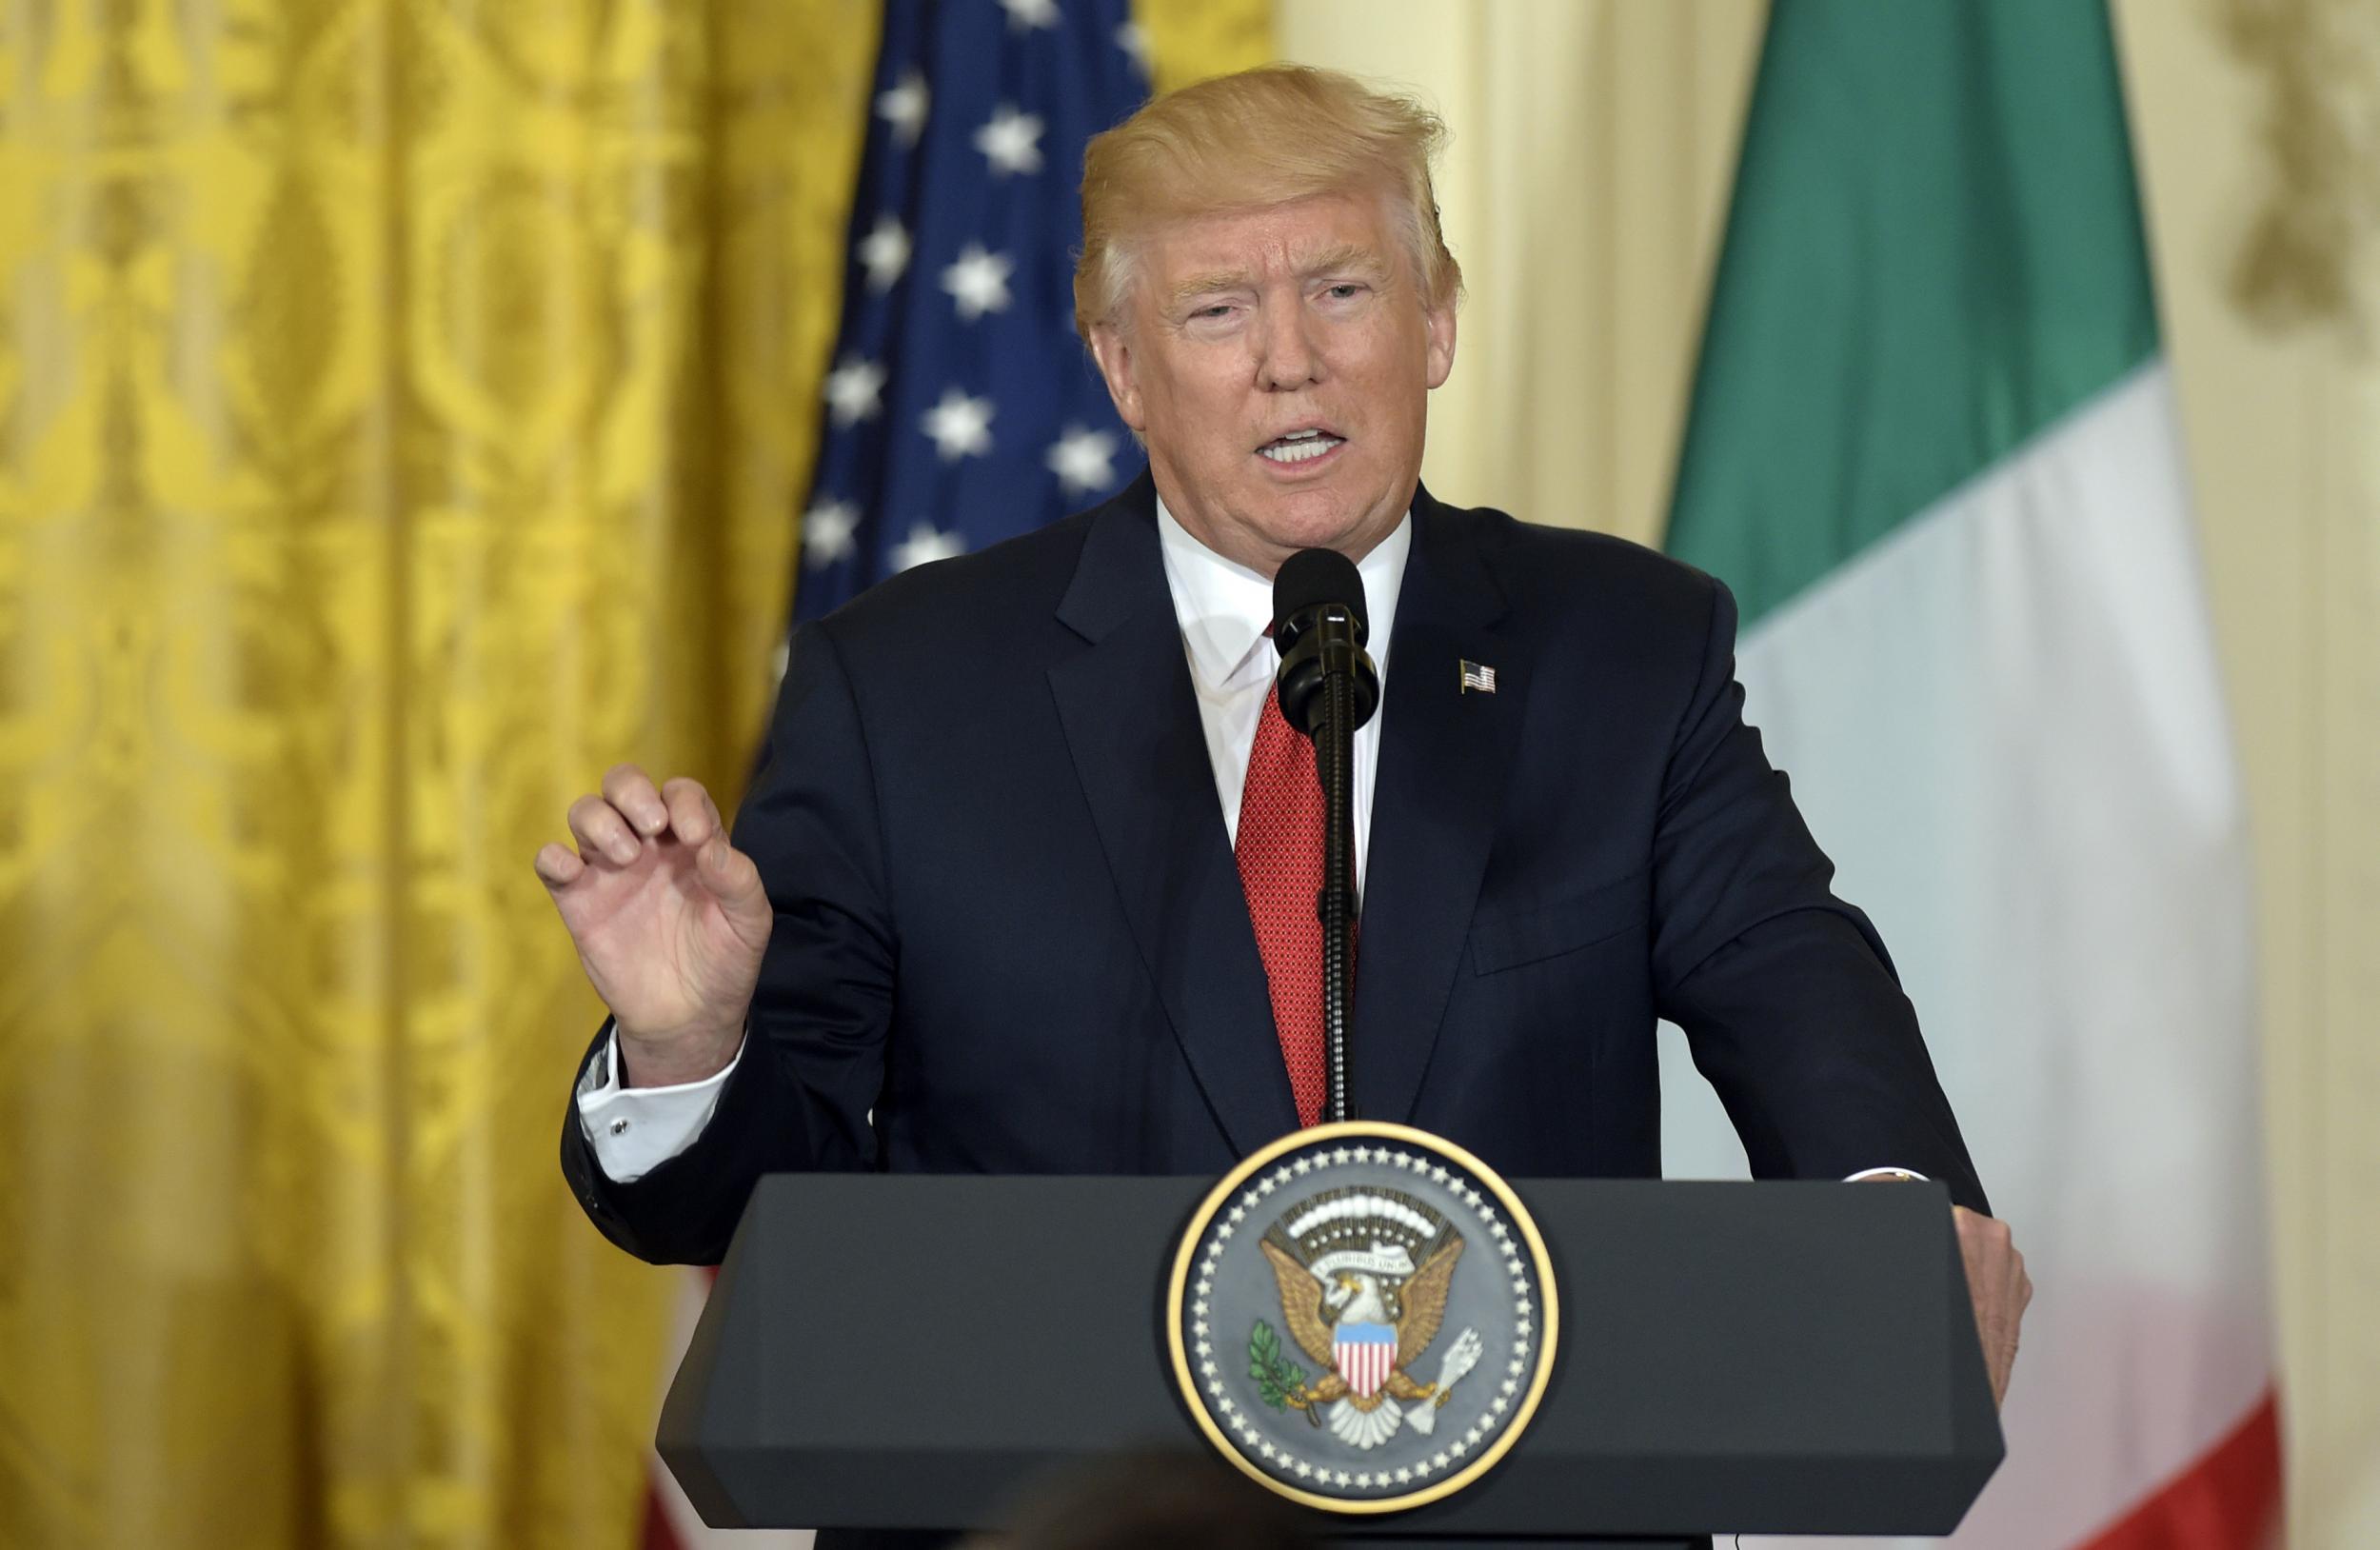 President Donald Trump speaks during a news conference with Italian Prime Minister Paolo Gentiloni